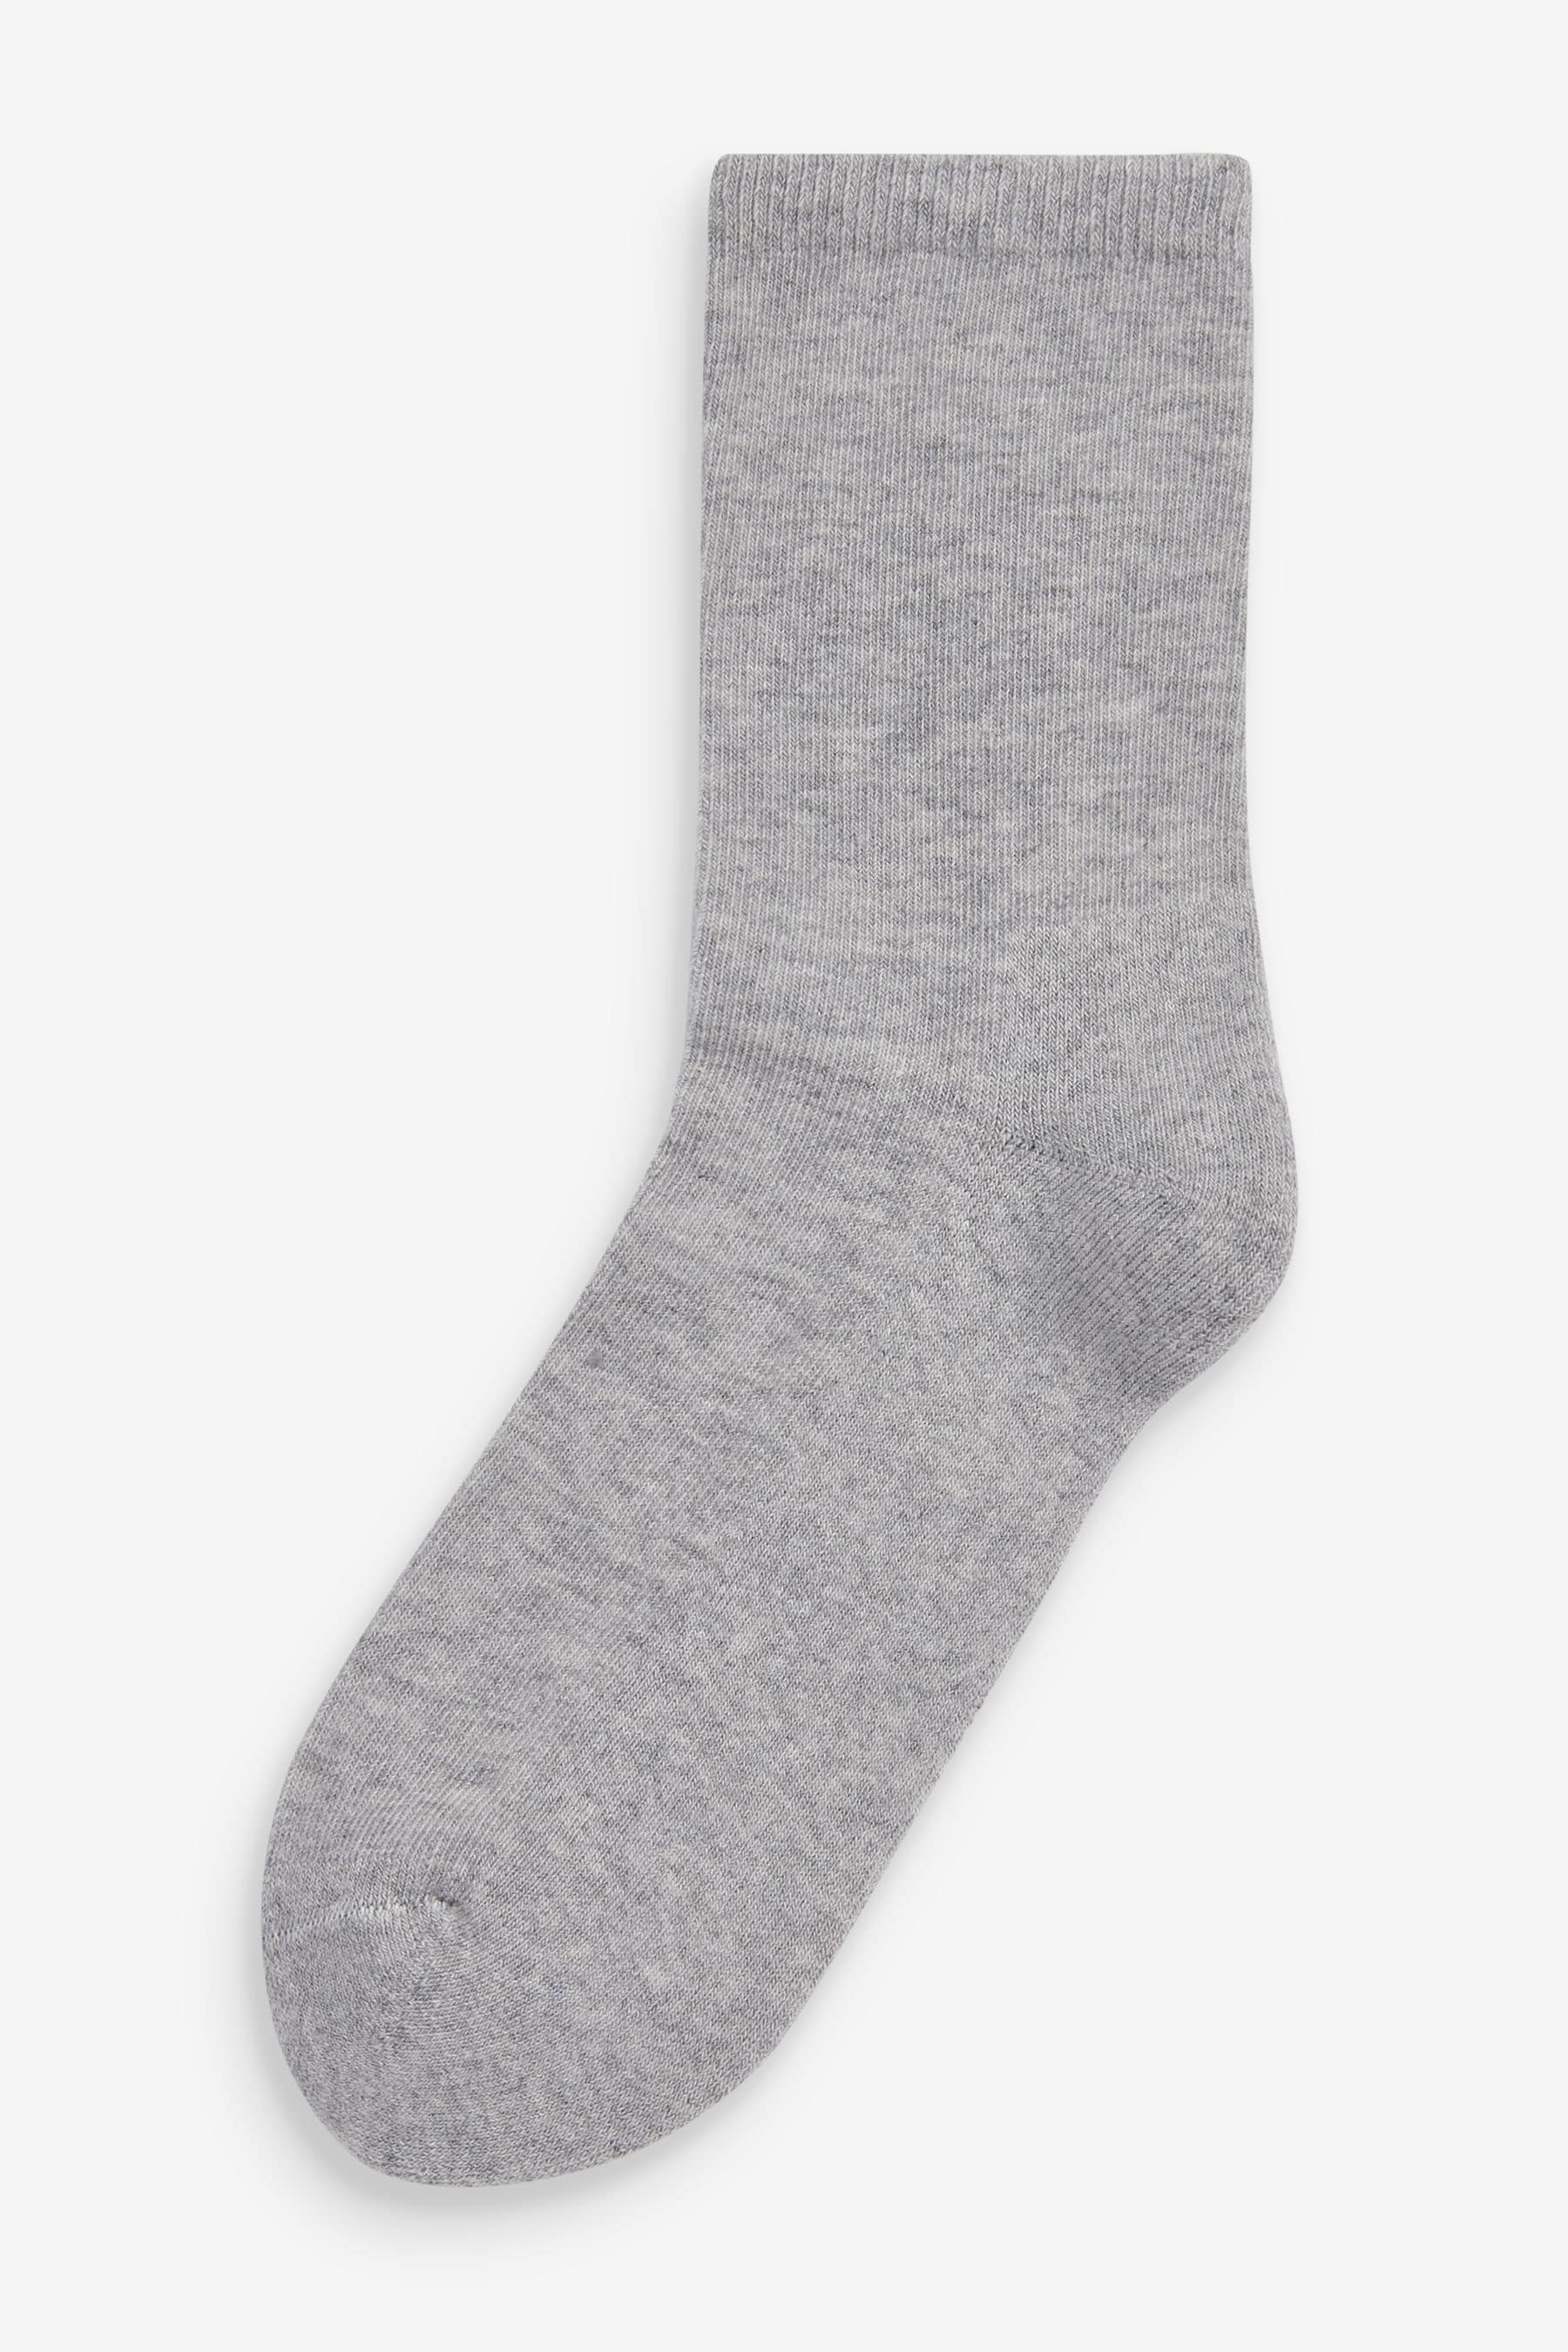 Buy Multi Cushion Sole Ankle Socks Four Pack from the Next UK online shop